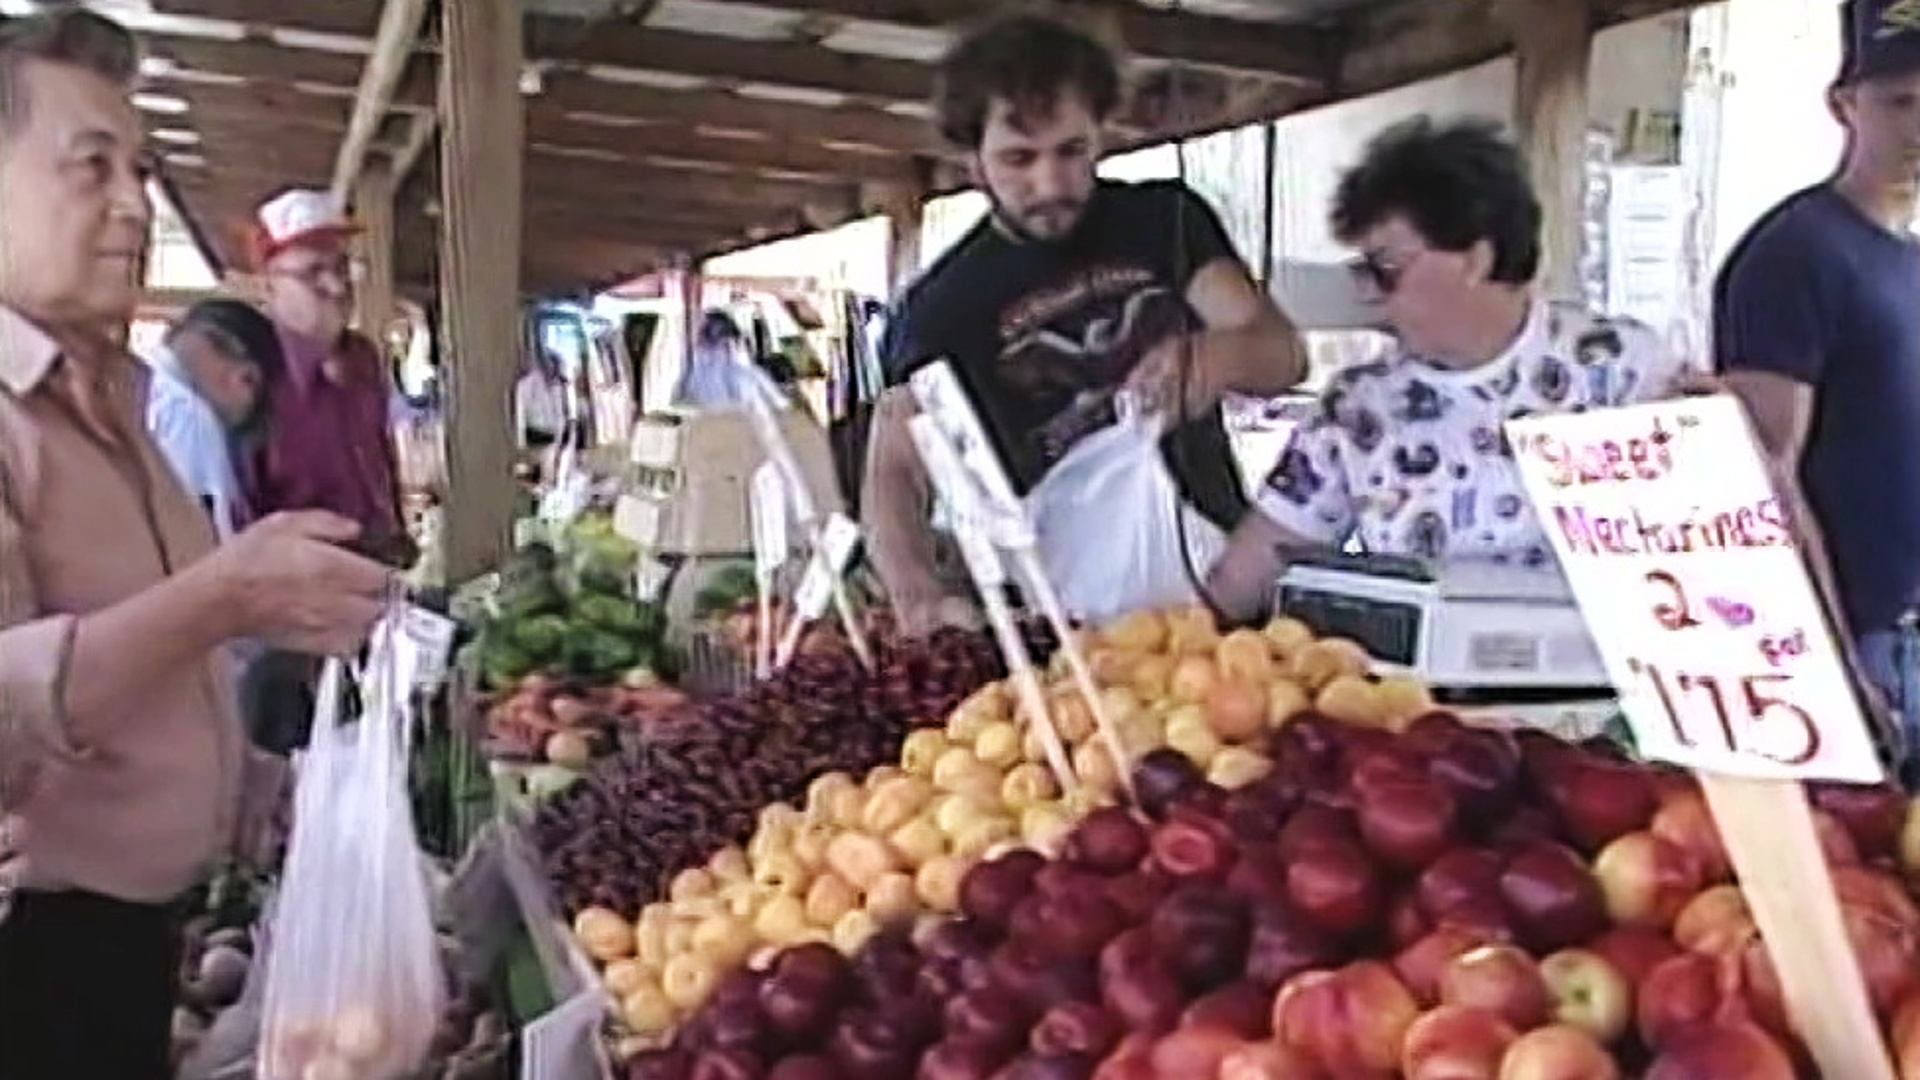 Mike visited this year-round farm market in Schuylkill County in 1990 to check out the summer's harvest.